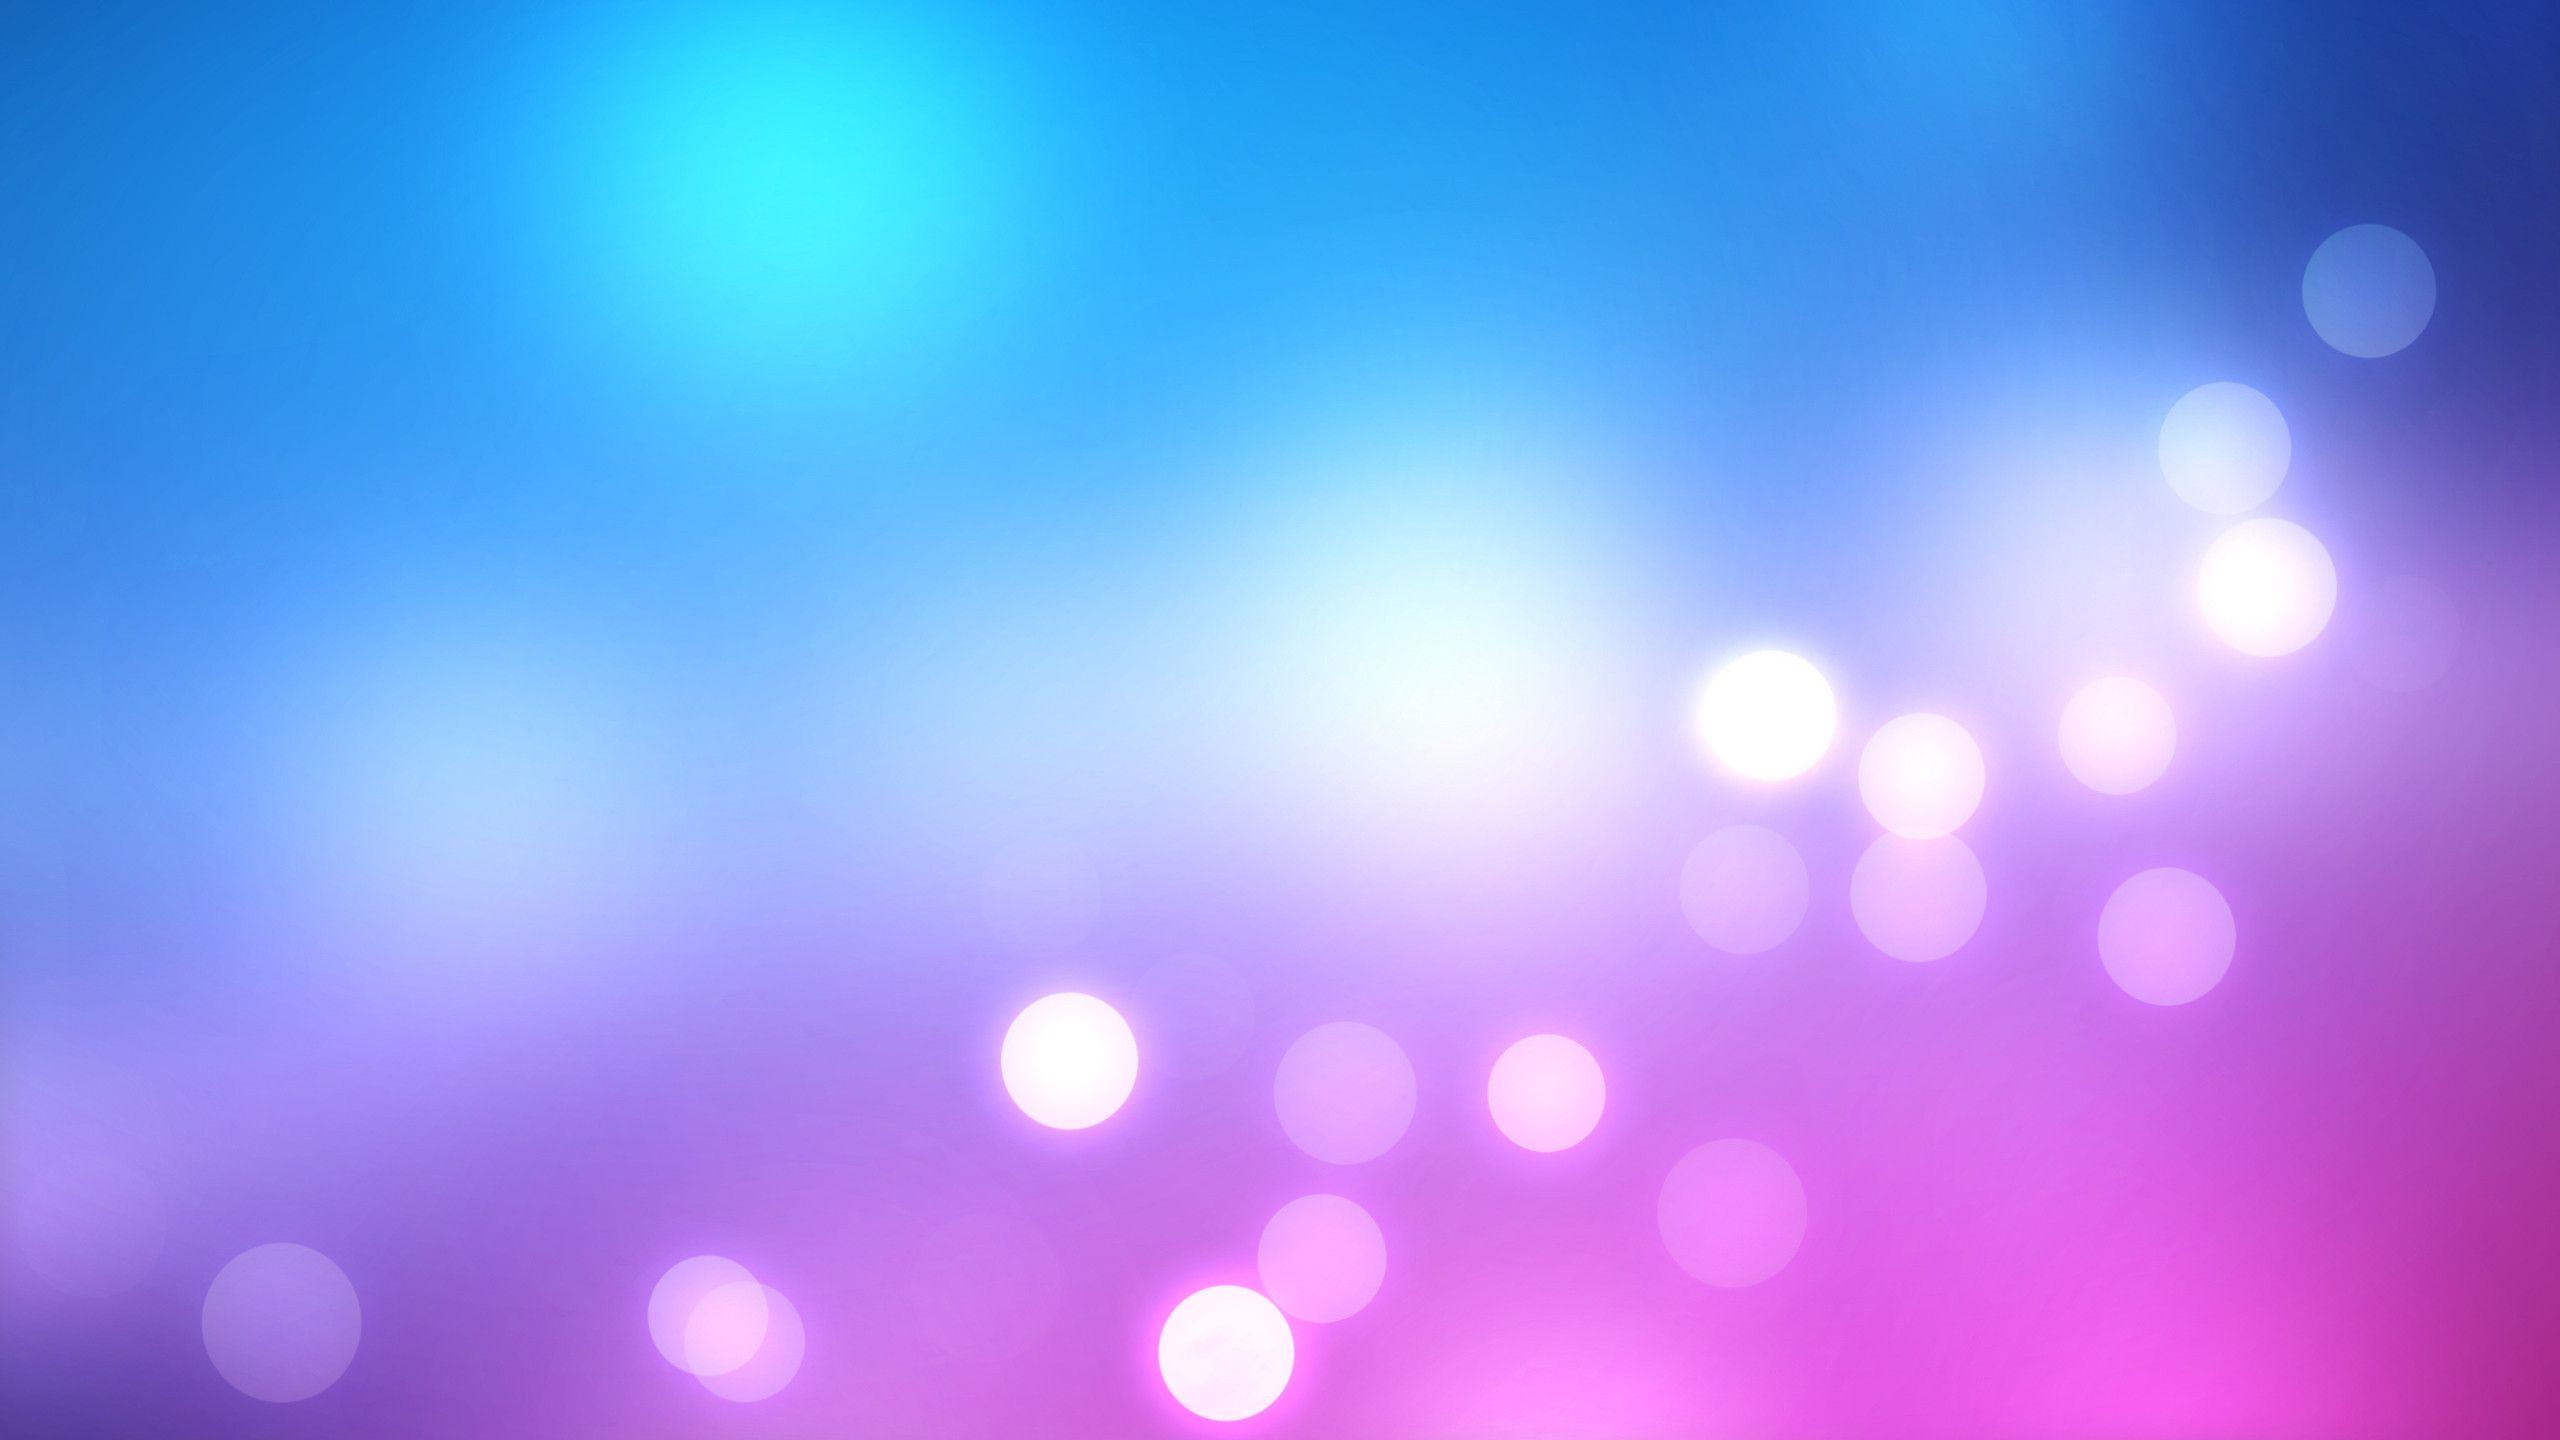 Wallpaper For > Purple And Blue Wallpaper